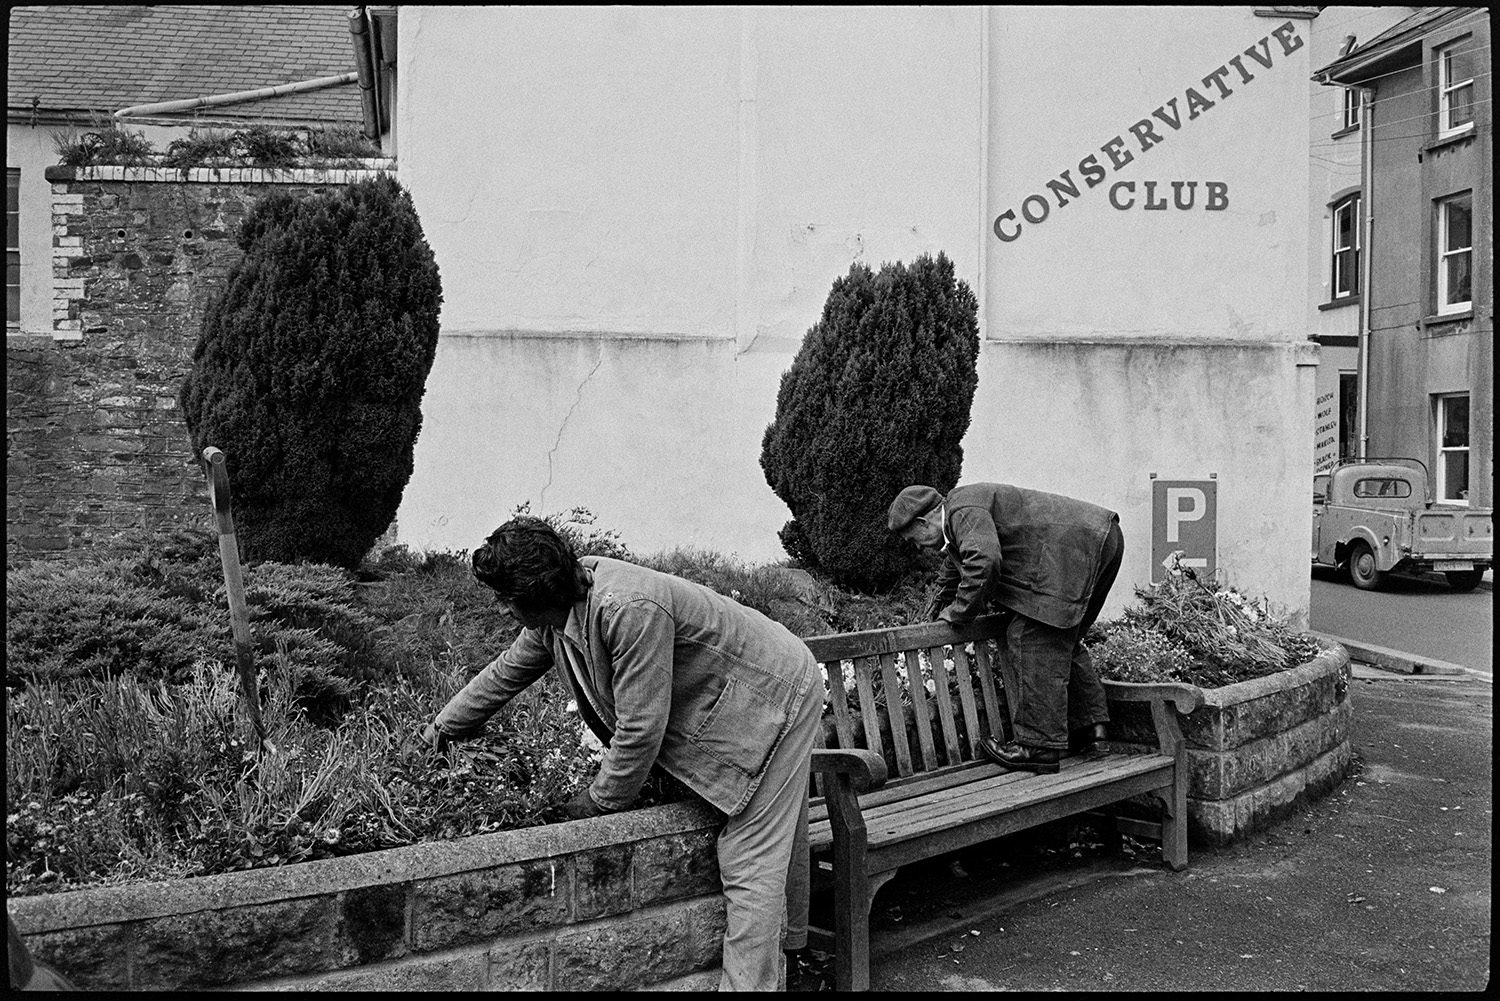 Street scenes with men tending flowers, motor bikes. 
[Two council workmen weeding flower beds in Torrington town centre. A fork is in the flower bed. One man is standing on a wooden bench to weed the flower bed. A Conservative Club and parking sign are on the wall behind the flower bed.]